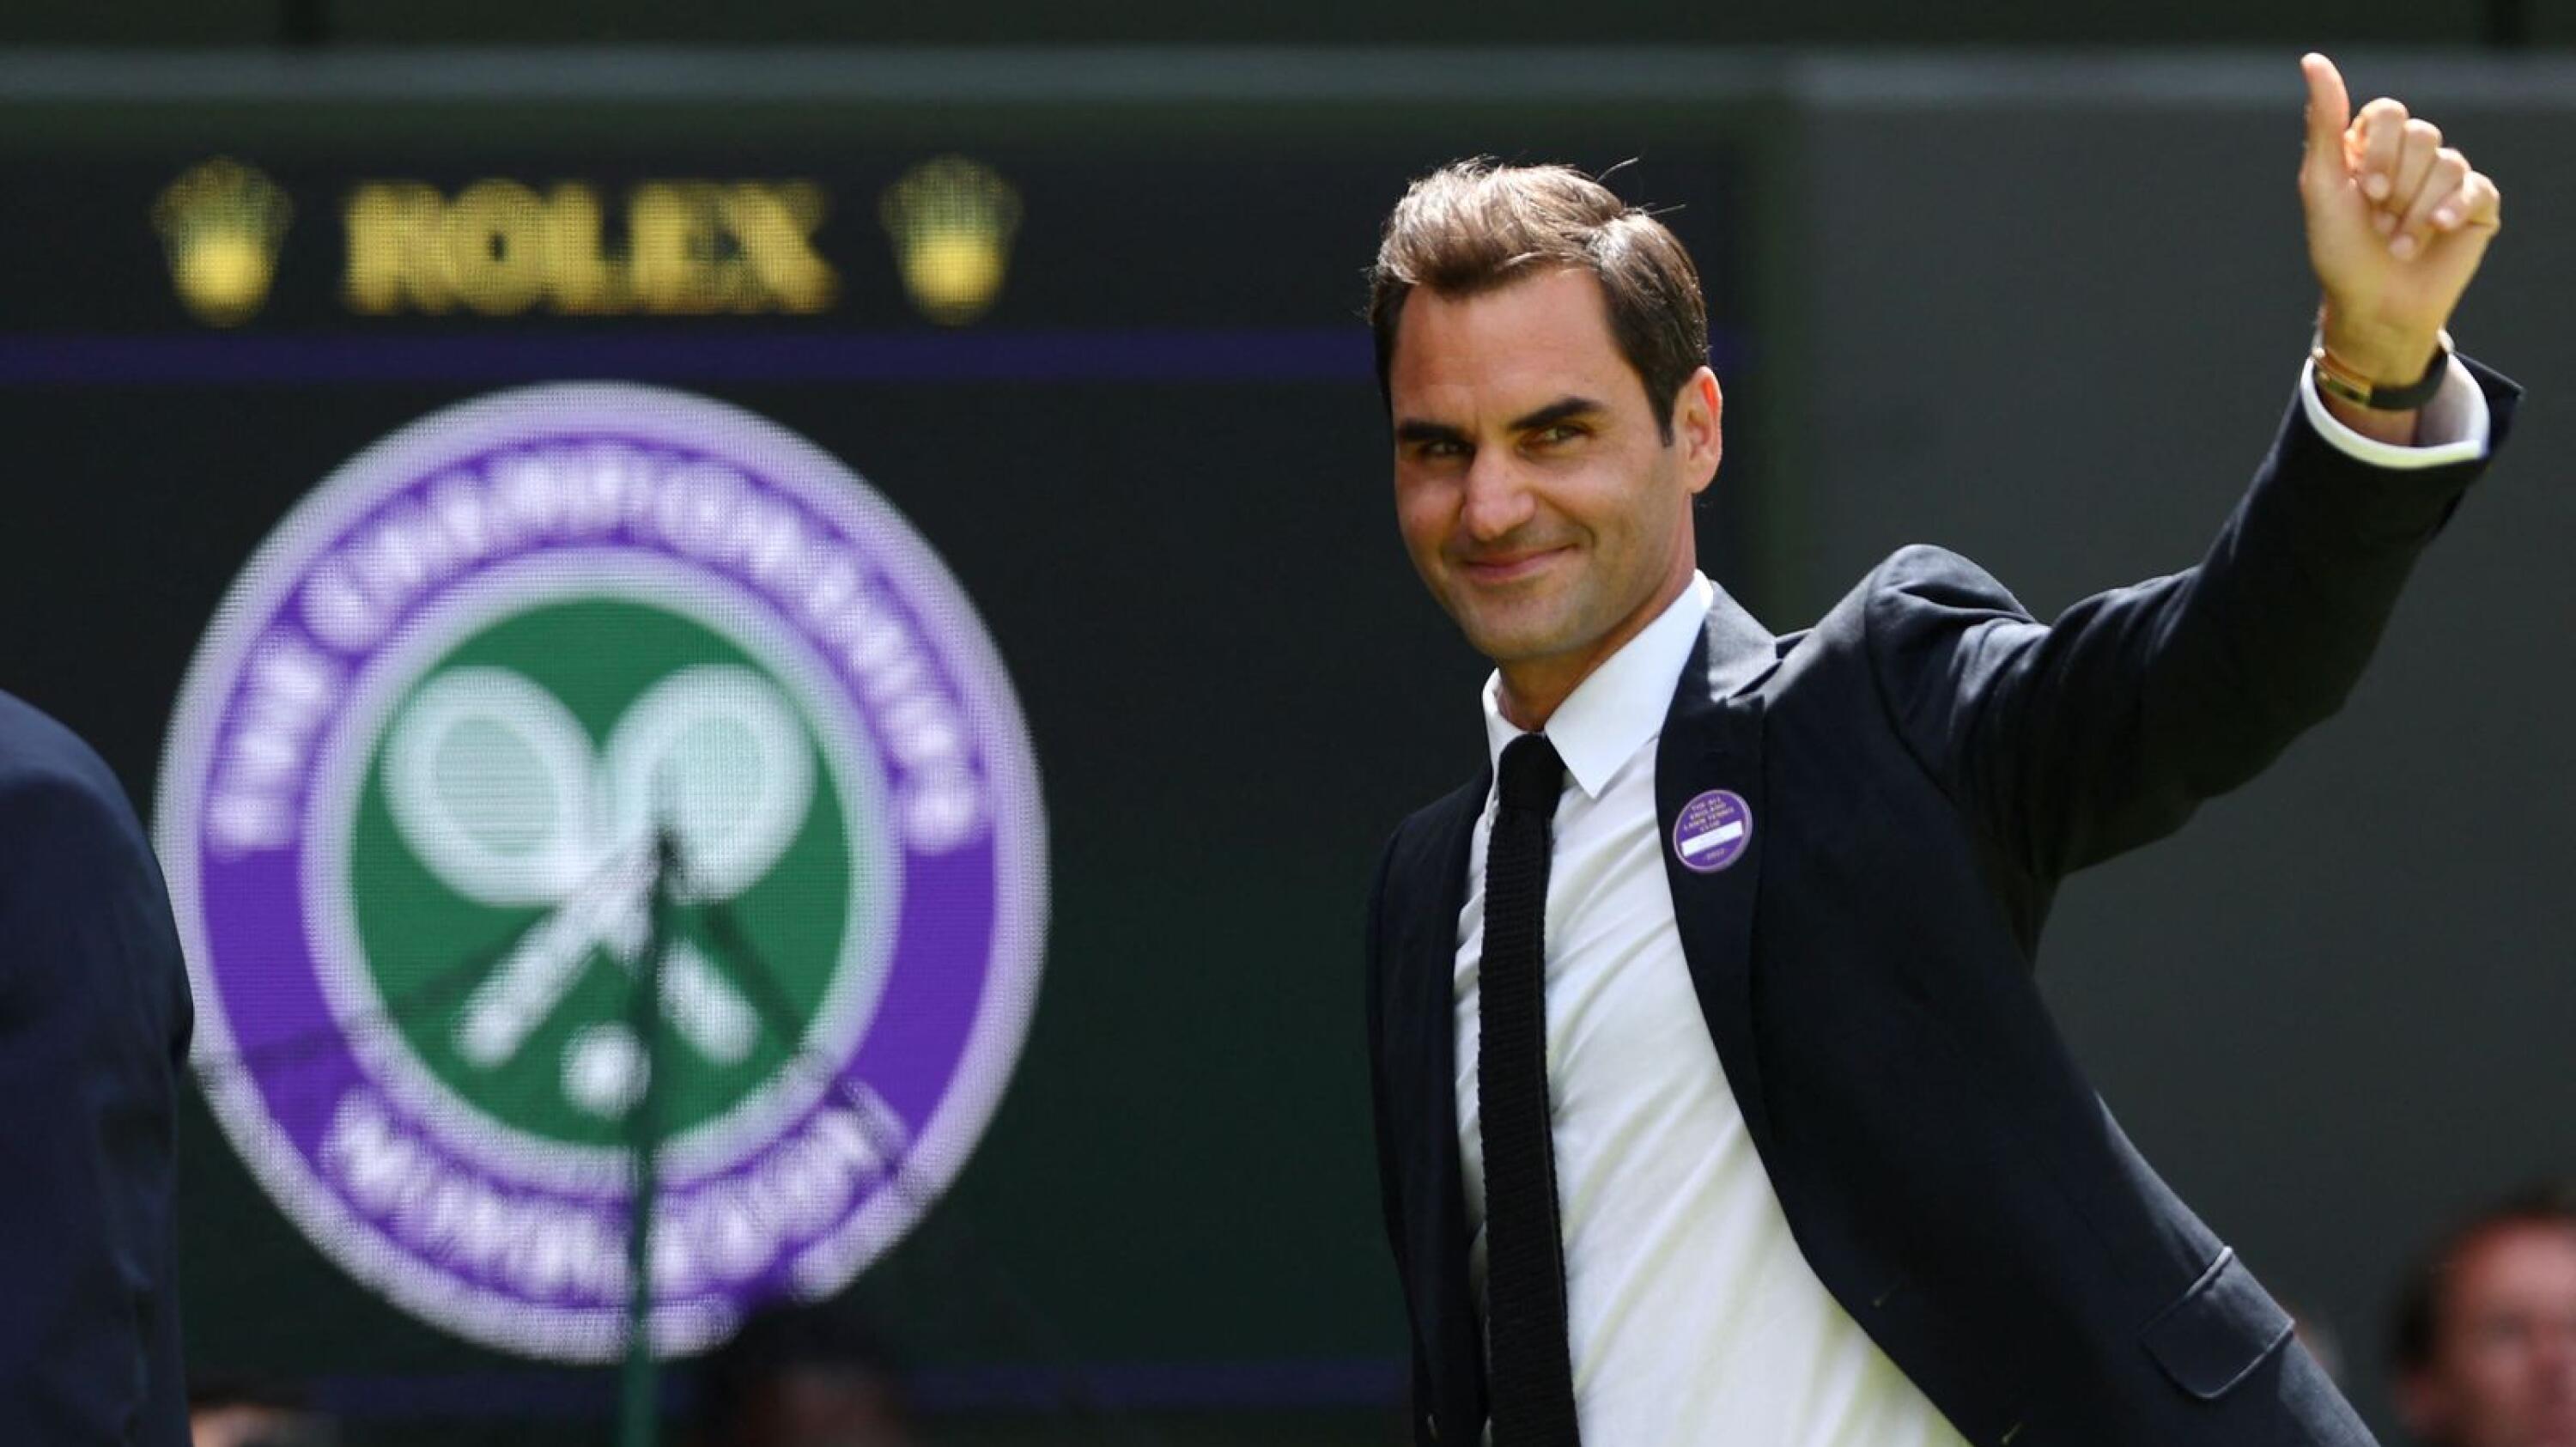 Swiss icon Roger Federer has announced he will retire from tennis after next week’s Laver Cup in London